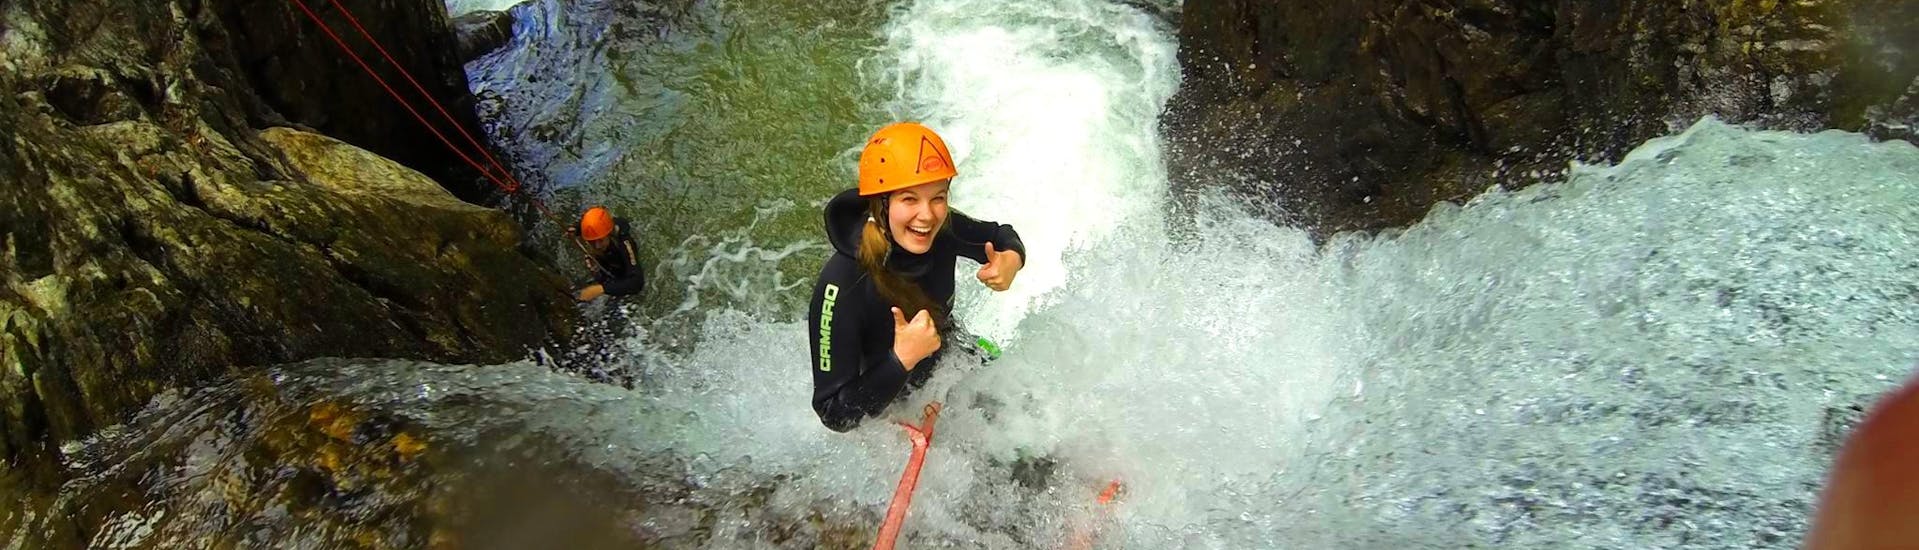 A woman abseiling from a waterfall during the Canyoning in Auerklamm from Haiming - Manitou Tour with Wiggi Rafting Haiming.